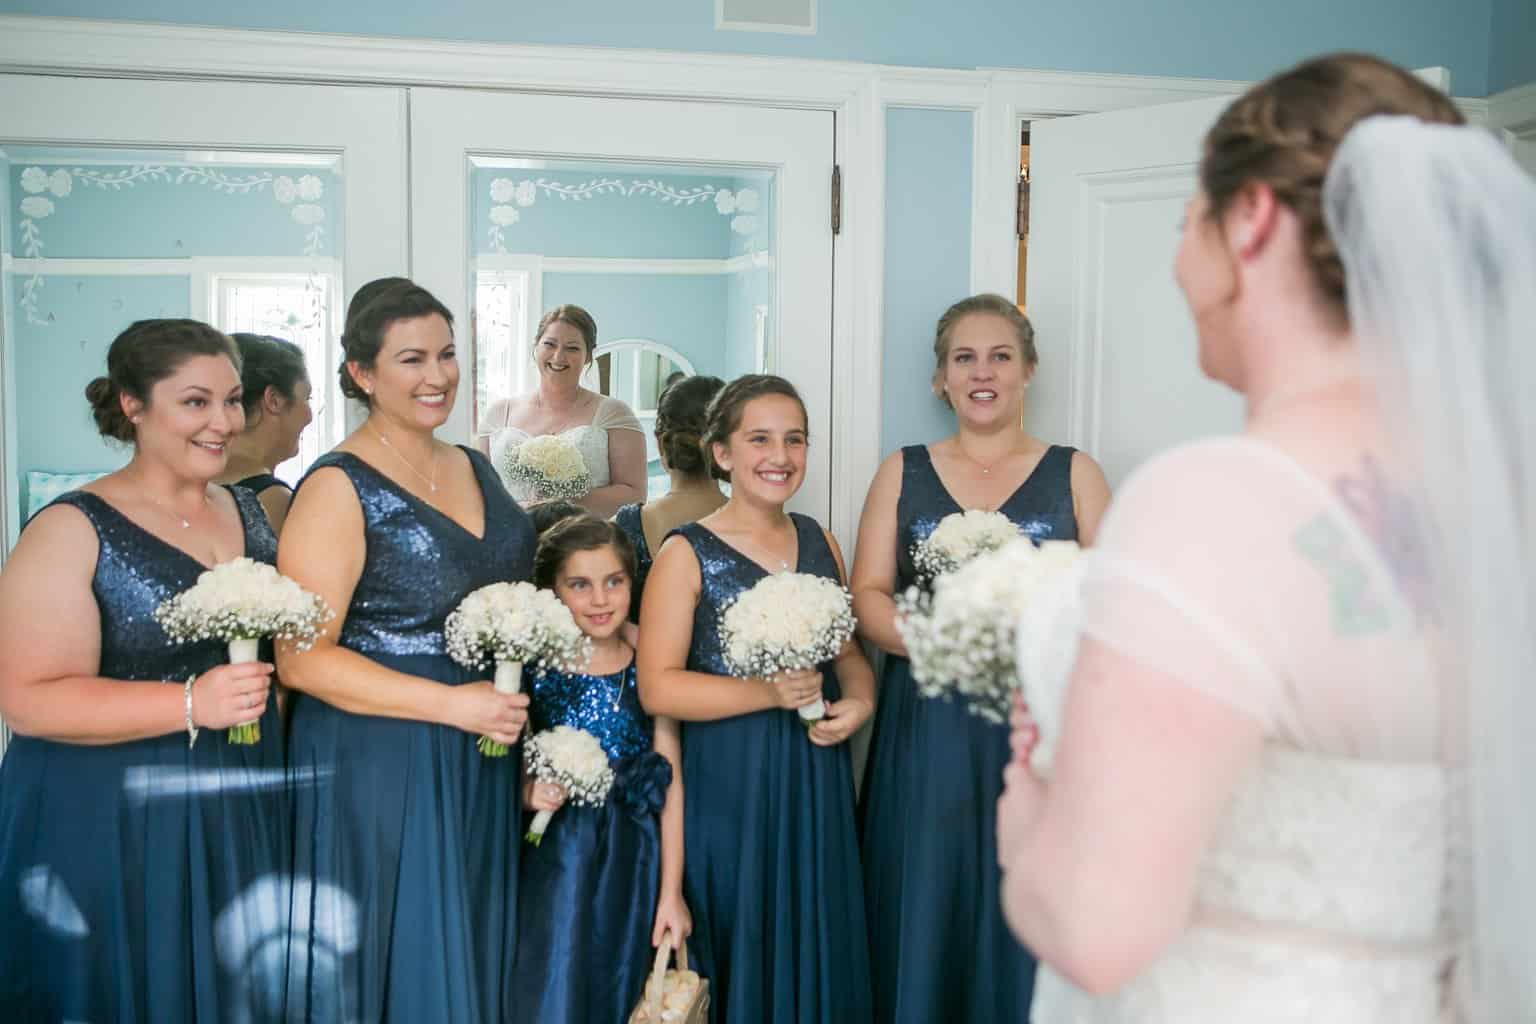 Free Happy bridesmaids of different ages in similar elegant dresses smiling while standing in room with flower bouquets and congratulating joyful bride Stock Photo